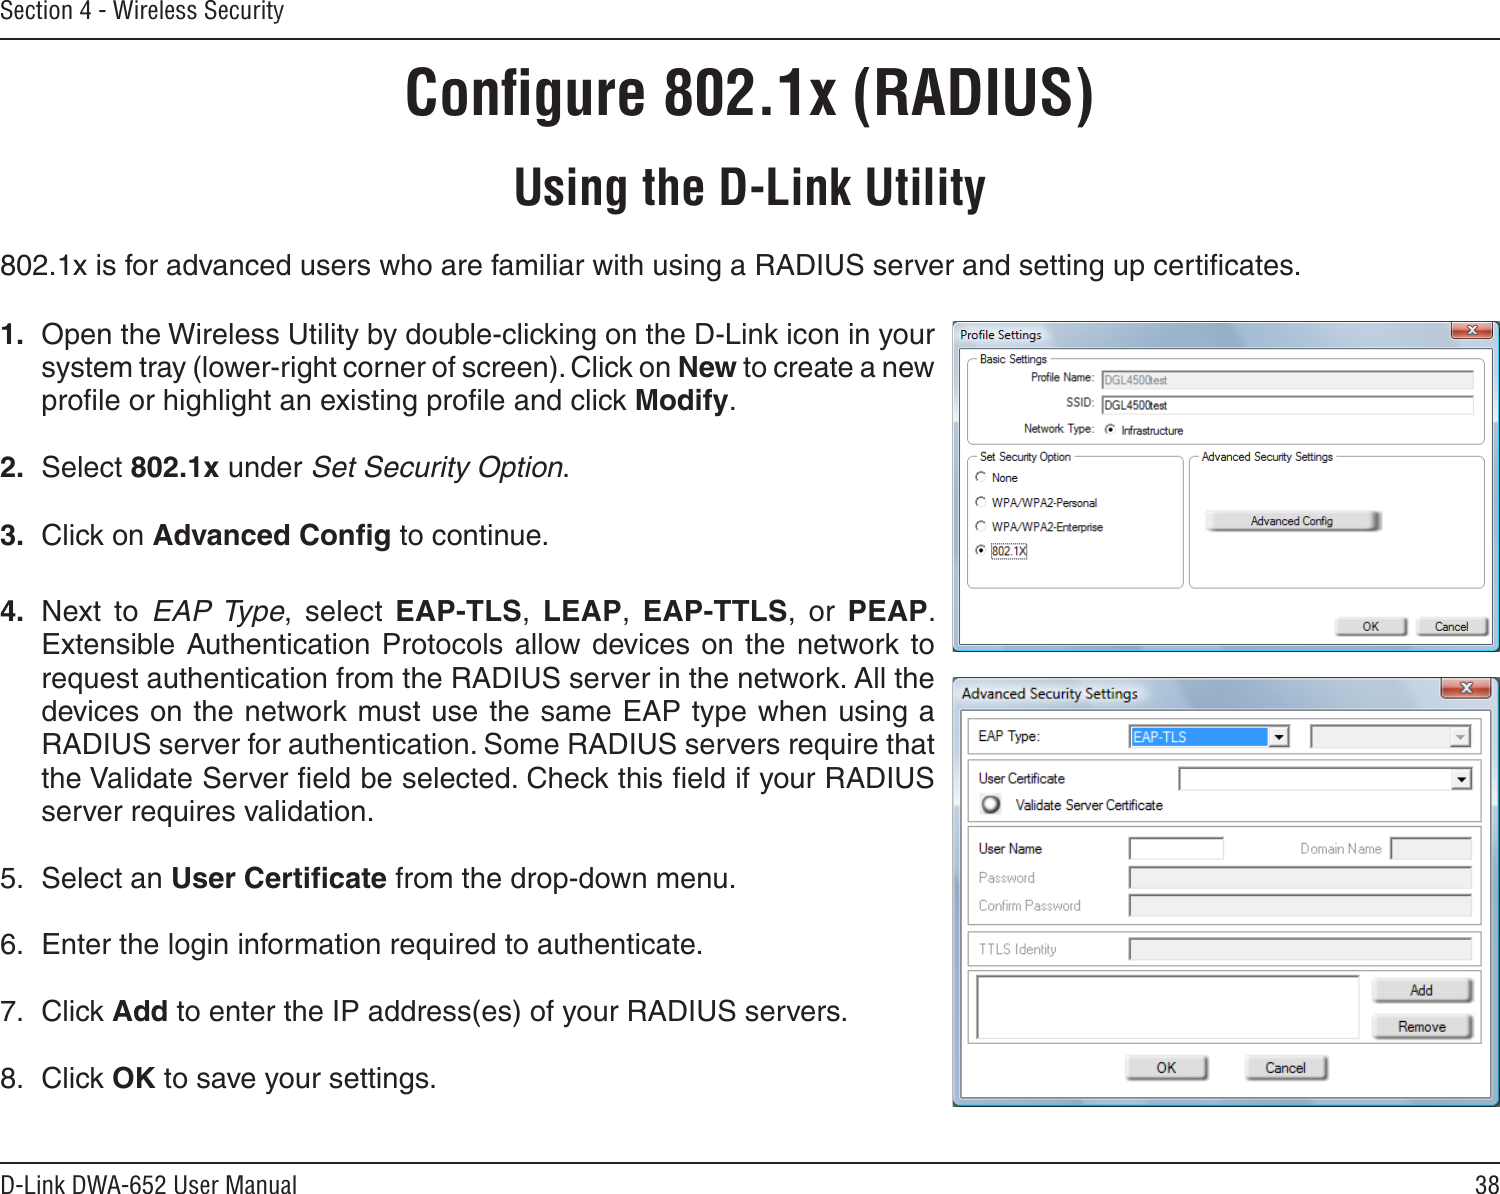 38D-Link DWA-652 User ManualSection 4 - Wireless SecurityConﬁgure 802.1x (RADIUS)Using the D-Link Utility802.1x is for advanced users who are familiar with using a RADIUS server and setting up certiﬁcates.1.  Open the Wireless Utility by double-clicking on the D-Link icon in your system tray (lower-right corner of screen). Click on New to create a new proﬁle or highlight an existing proﬁle and click Modify. 2.  Select 802.1x under Set Security Option.3.  Click on Advanced Conﬁg to continue.4.  Next  to  EAP Type,  select  EAP-TLS,  LEAP,  EAP-TTLS,  or  PEAP. Extensible  Authentication Protocols  allow devices on  the network to request authentication from the RADIUS server in the network. All the devices on the network must use the same EAP type when using a RADIUS server for authentication. Some RADIUS servers require that the Validate Server ﬁeld be selected. Check this ﬁeld if your RADIUS server requires validation.5.  Select an User Certiﬁcate from the drop-down menu.6.  Enter the login information required to authenticate.7.  Click Add to enter the IP address(es) of your RADIUS servers.8.  Click OK to save your settings.